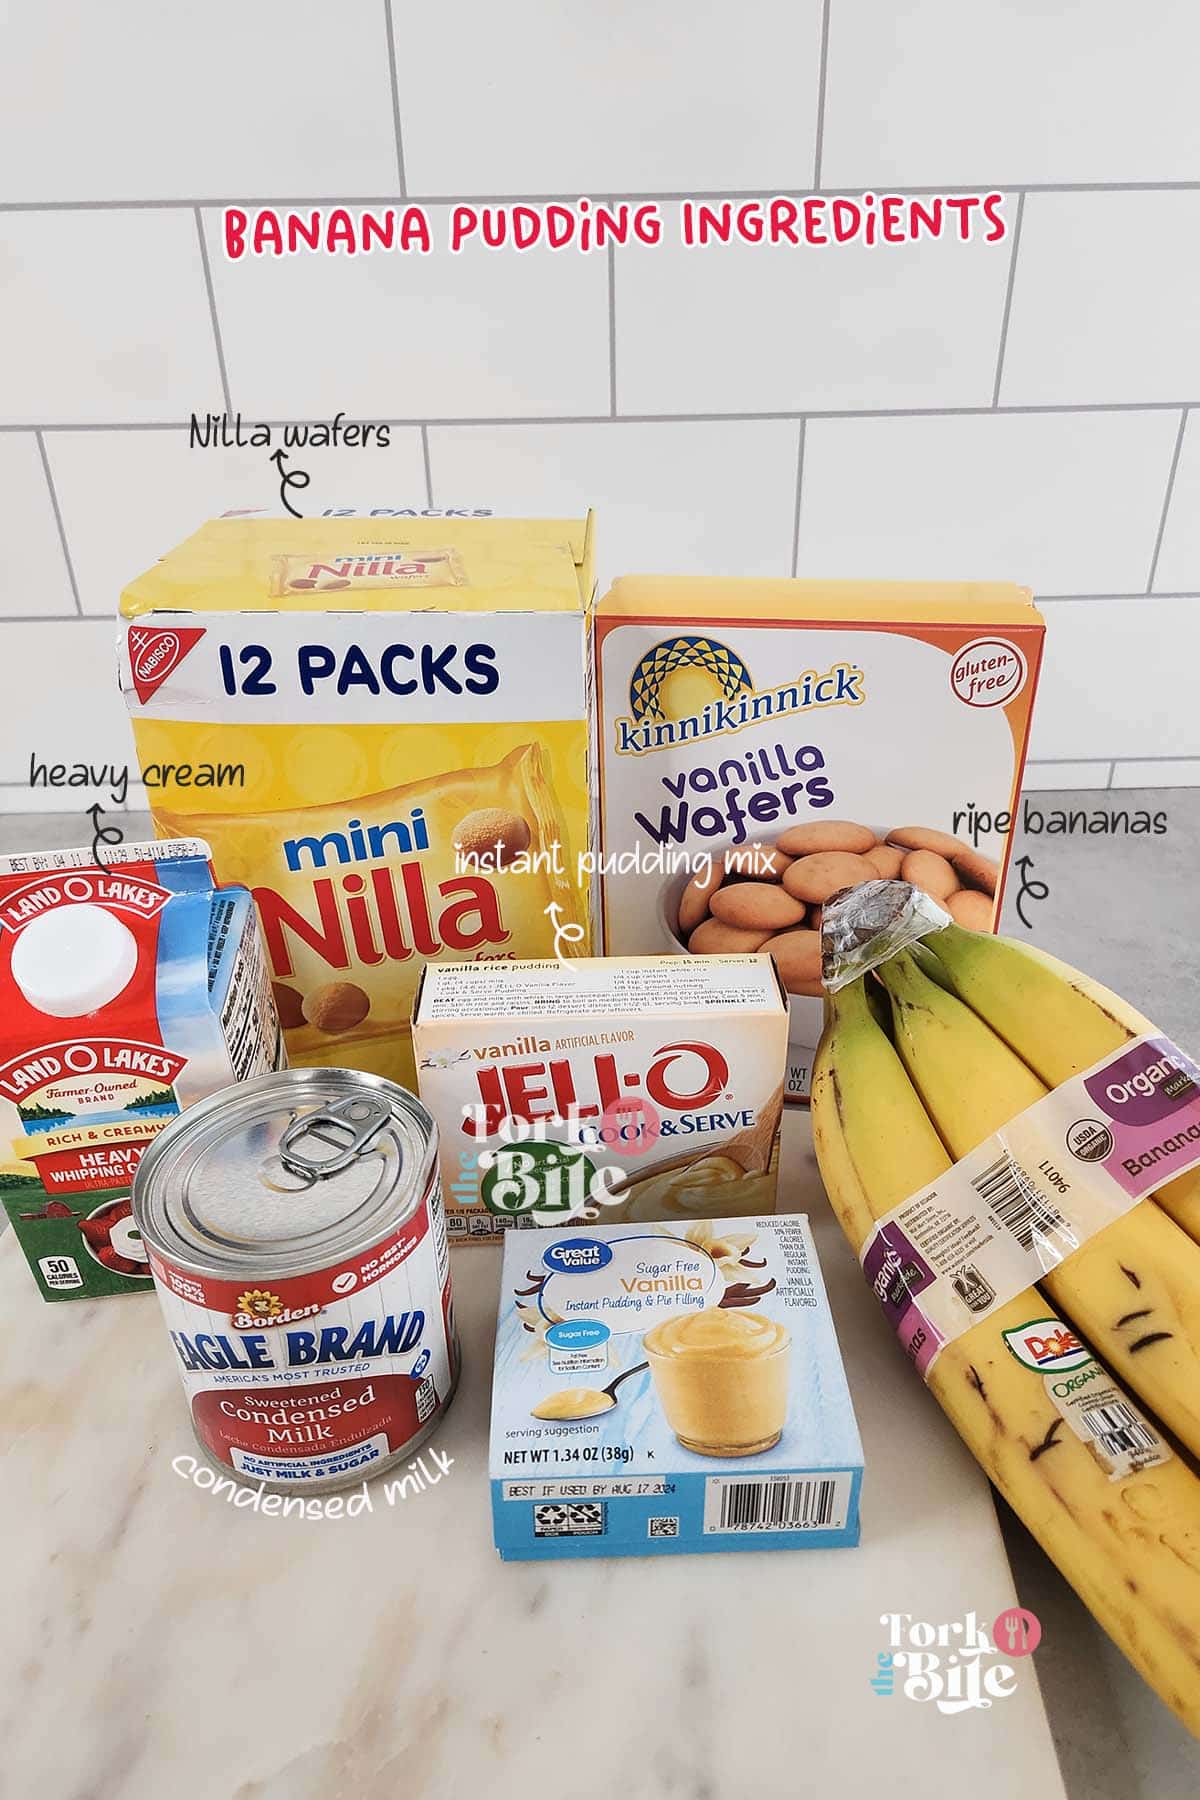 Image of fresh banana pudding ingredients, including ripe bananas, sweetened condensed milk, vanilla wafers, and whipped cream, perfectly arranged and ready for creating the delectable Pioneer Woman's dessert recipe - a treat for the taste buds and eyes alike.